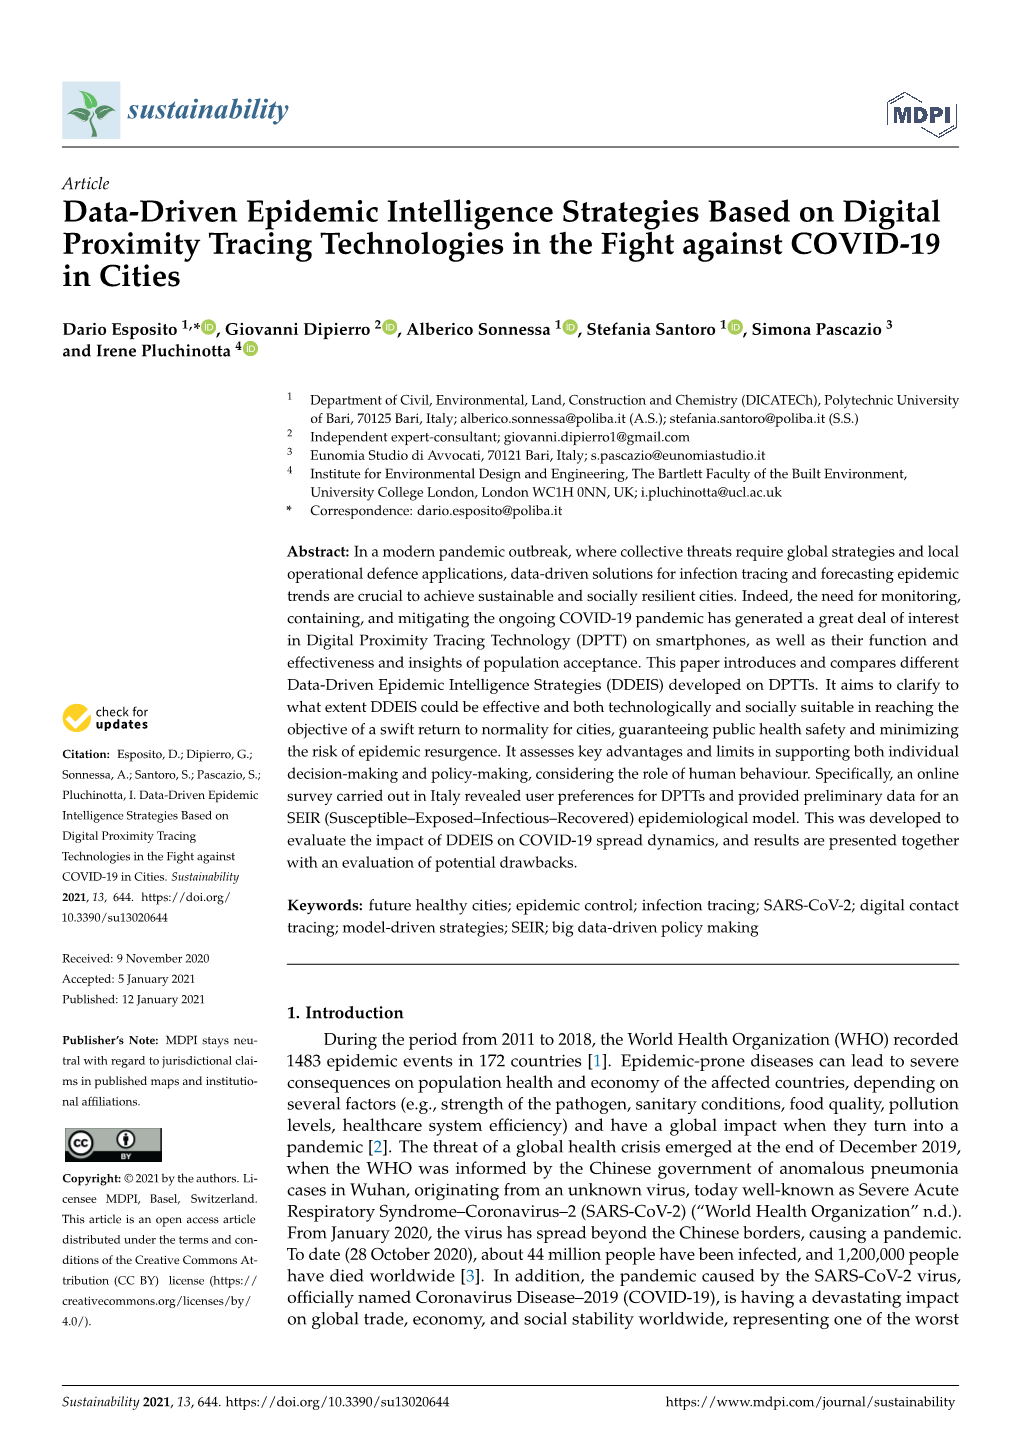 Data-Driven Epidemic Intelligence Strategies Based on Digital Proximity Tracing Technologies in the Fight Against COVID-19 in Cities